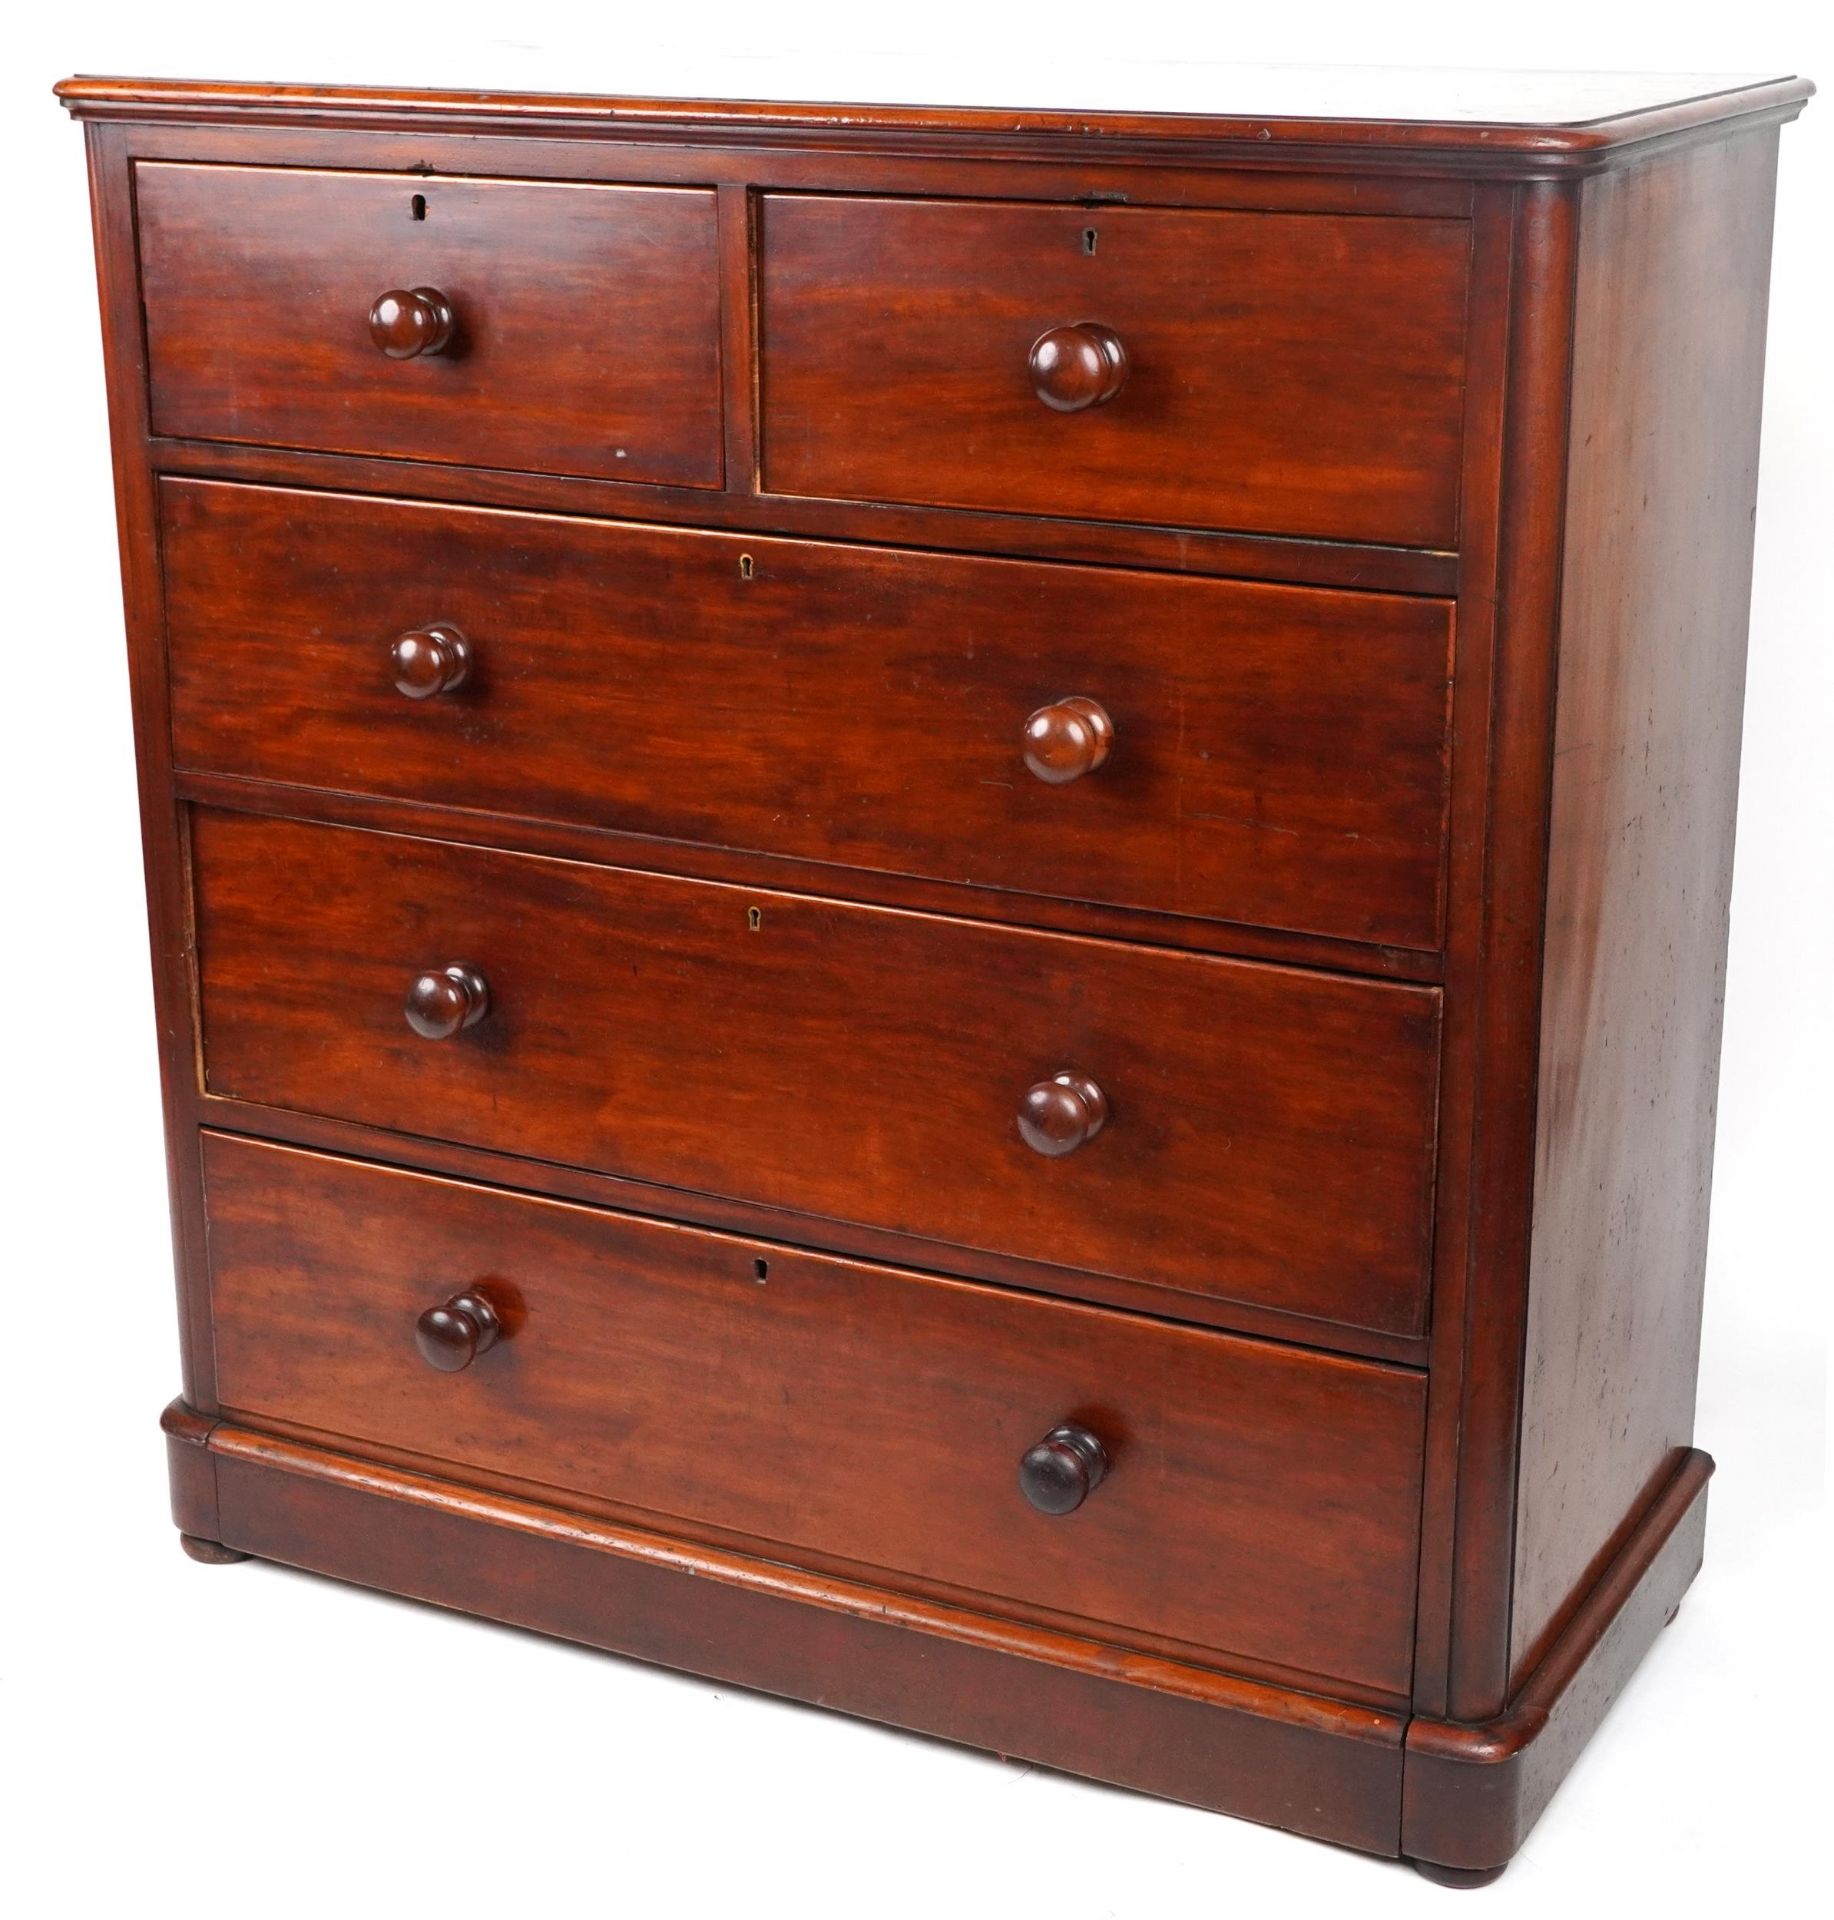 Victorian mahogany five drawer chest, 119cm H x 117.5cm W x 52cm D : For further information on this